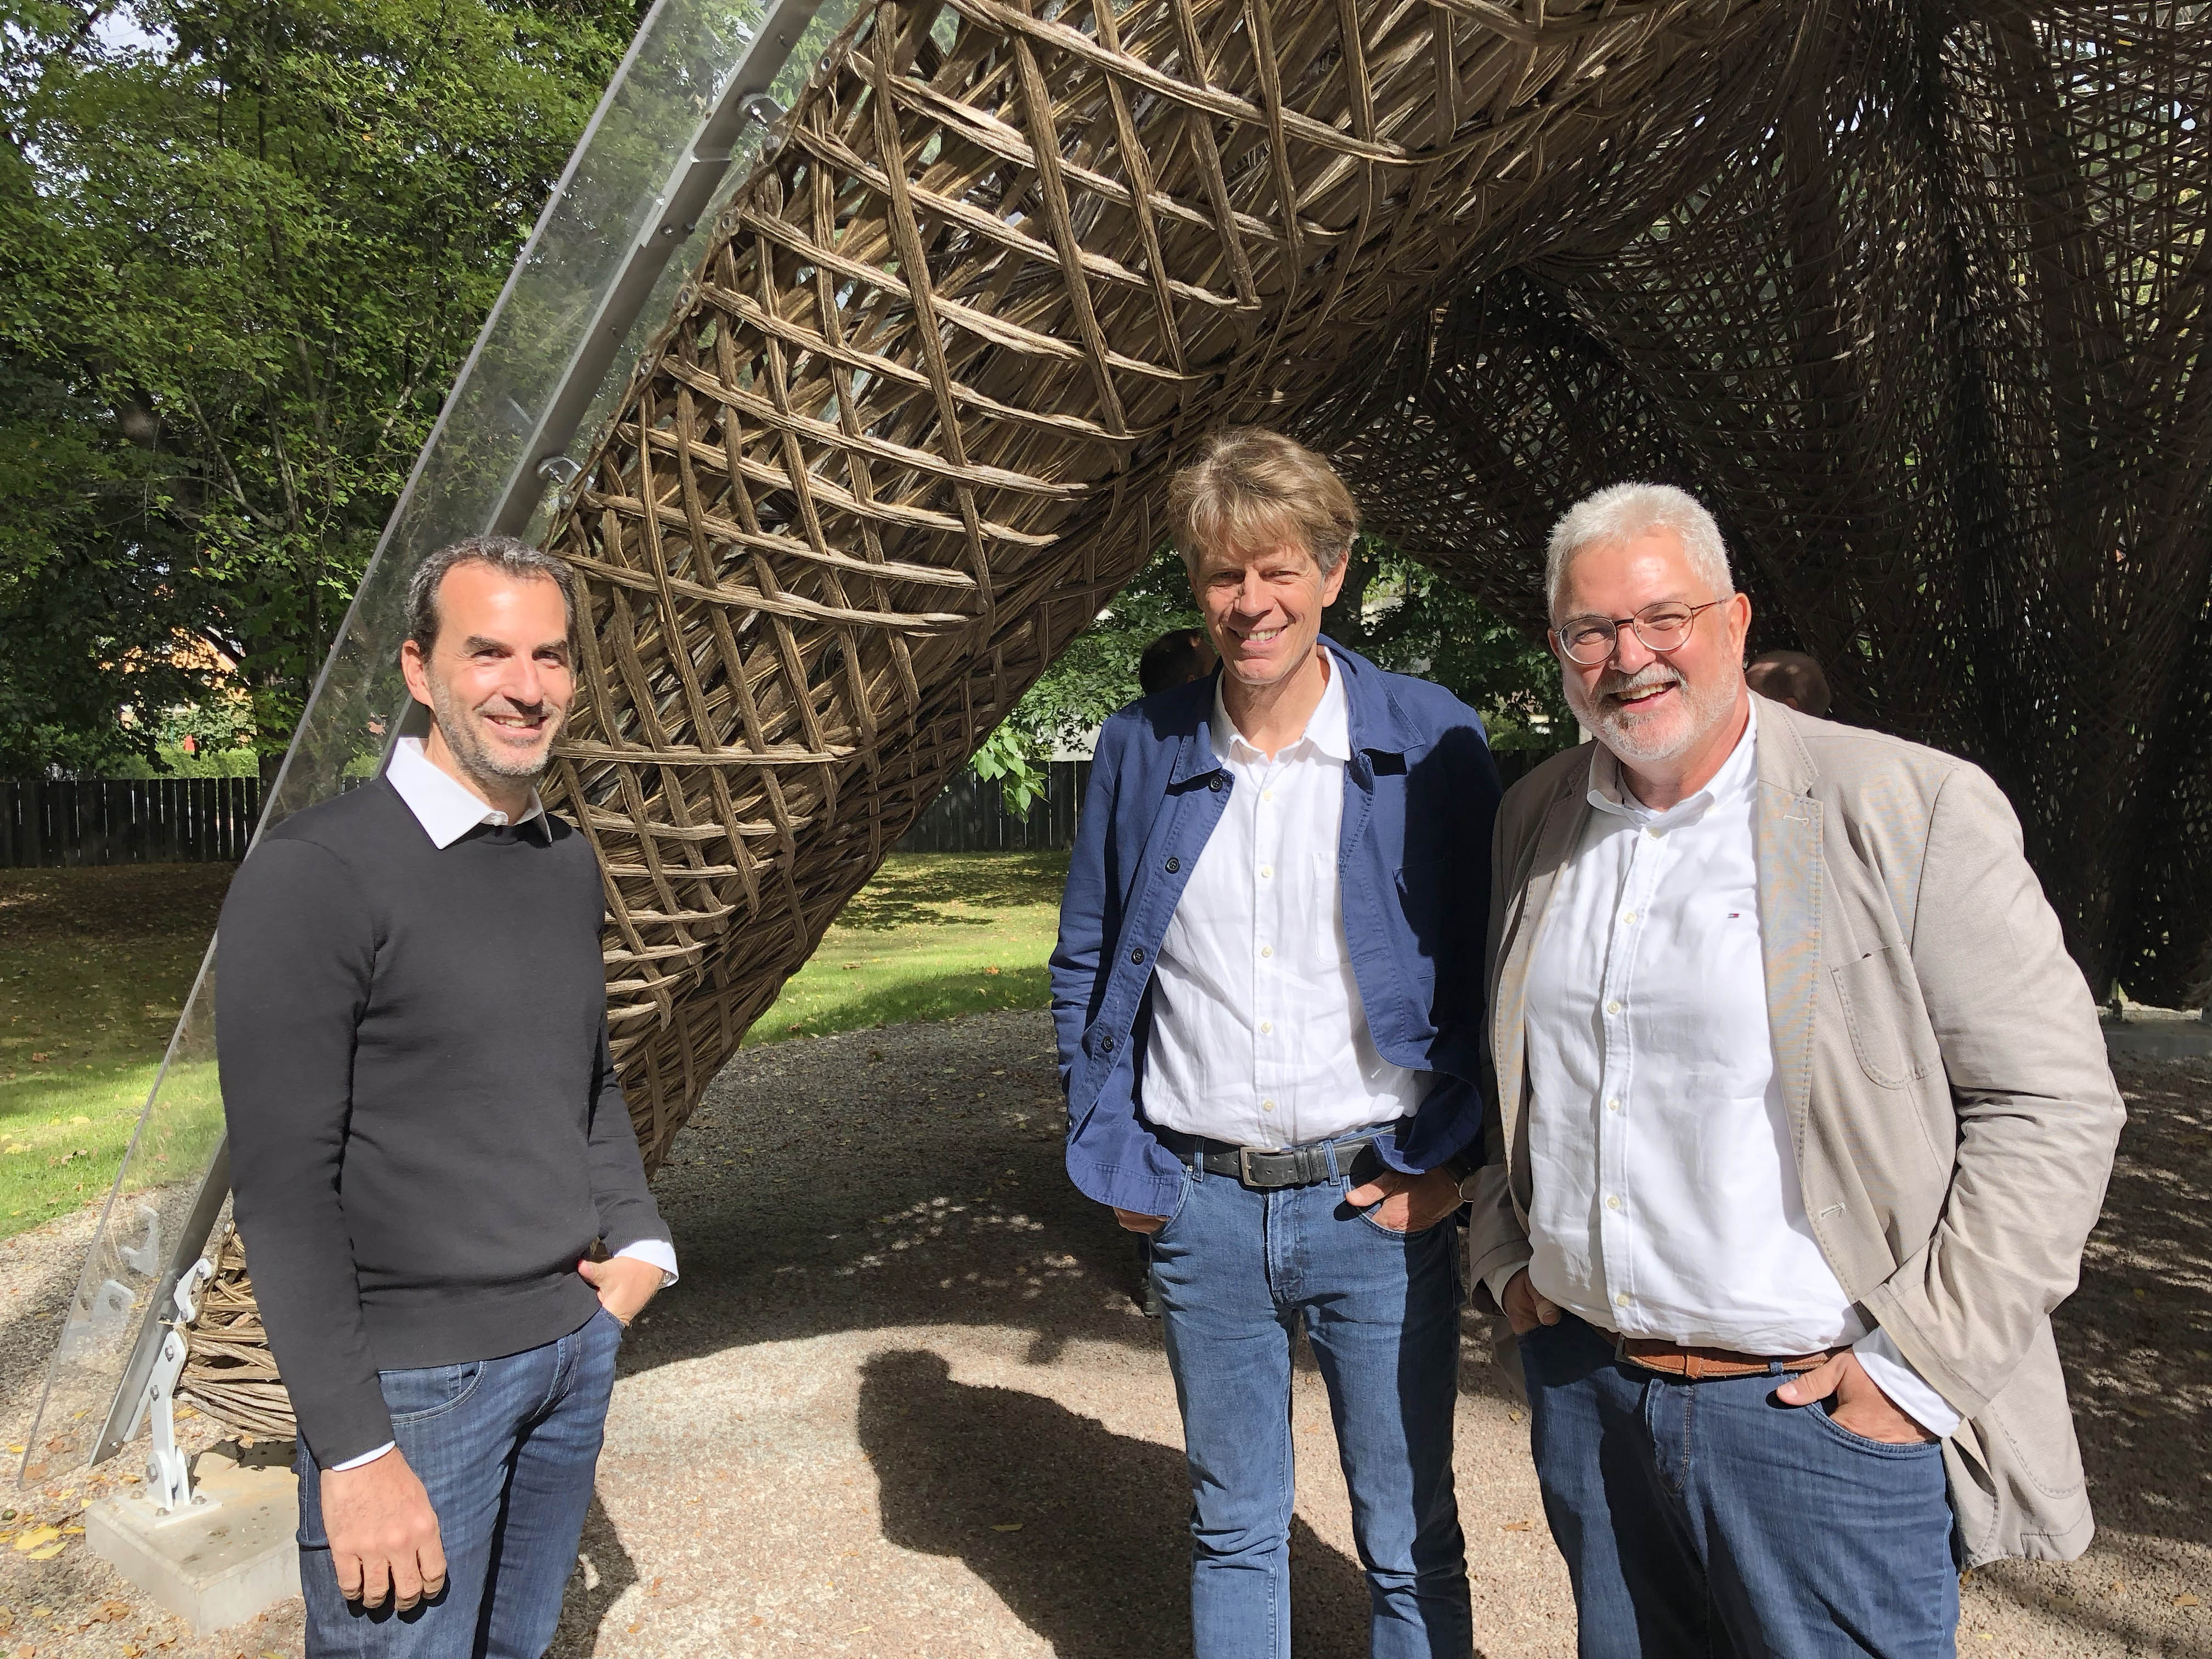 Group picture of three middle-aged men outdoors in front of a support element of the livMatS pavilion